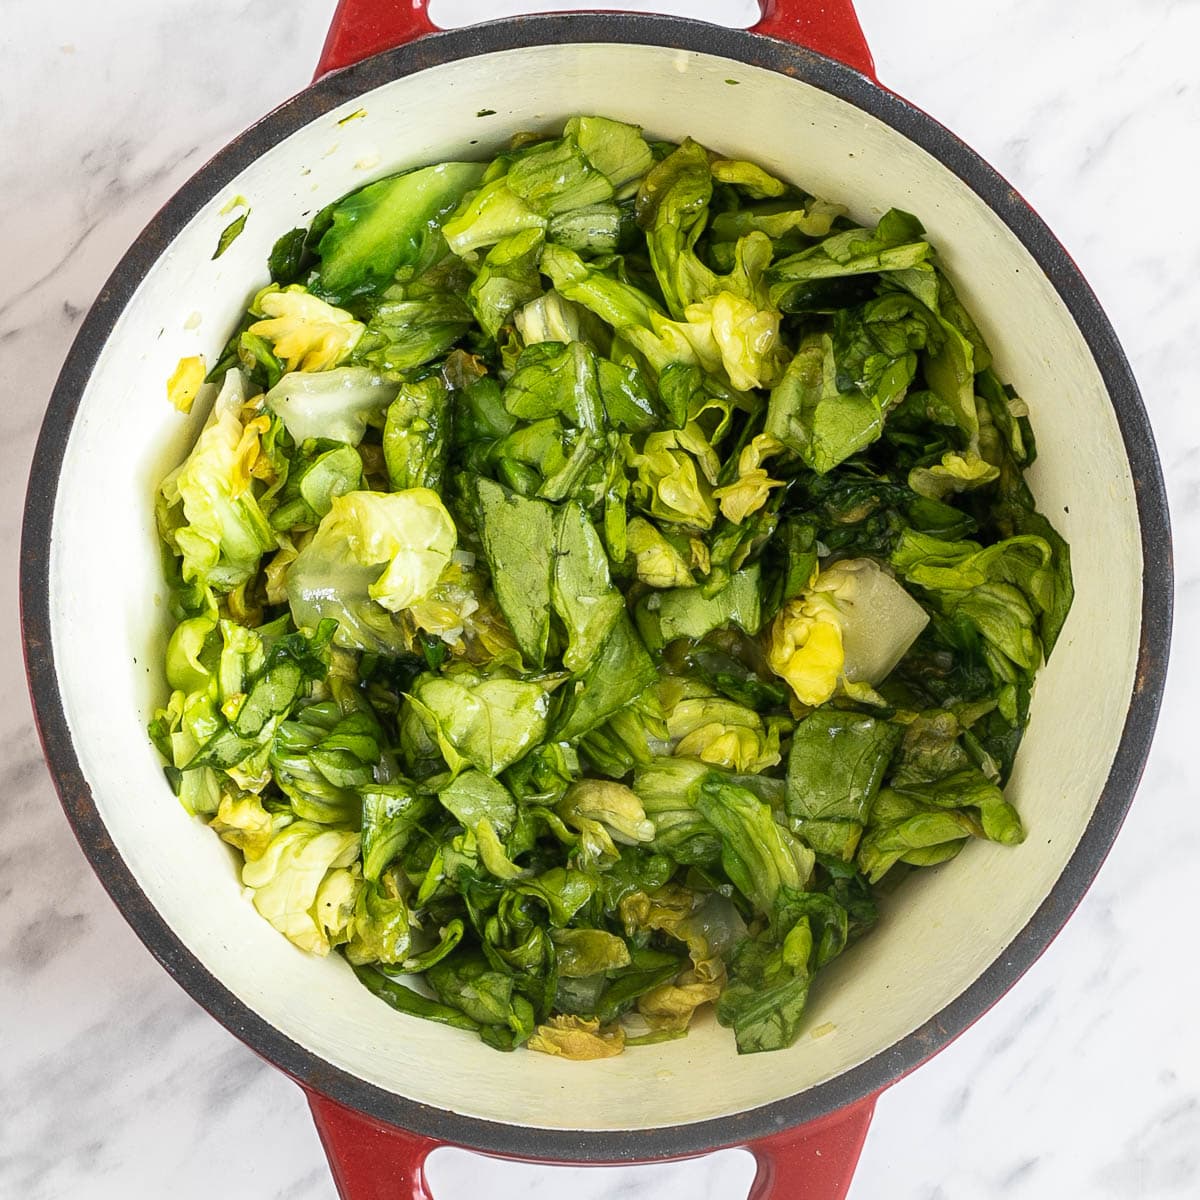 A red white enameled Dutch oven with chopped wilted green escarole.